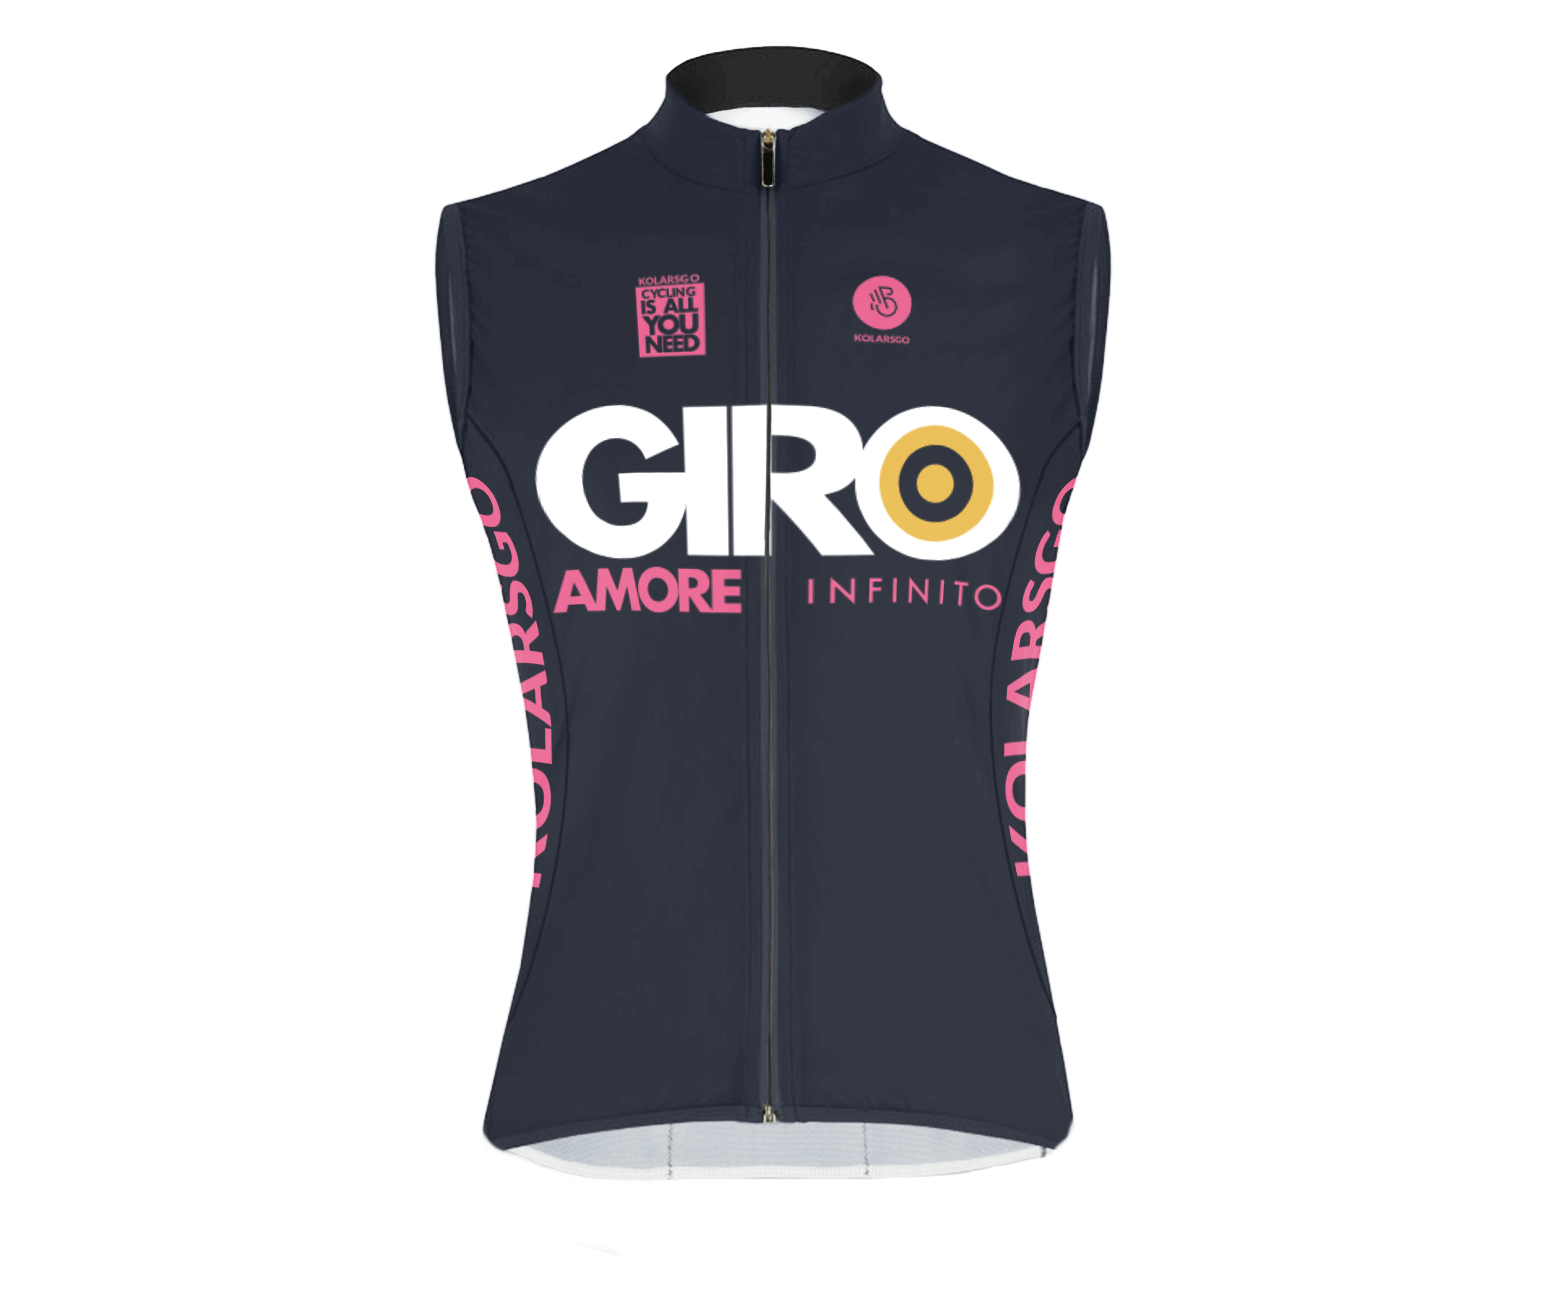 Cycling jersey without sleeves Giro Dark Blue image 1